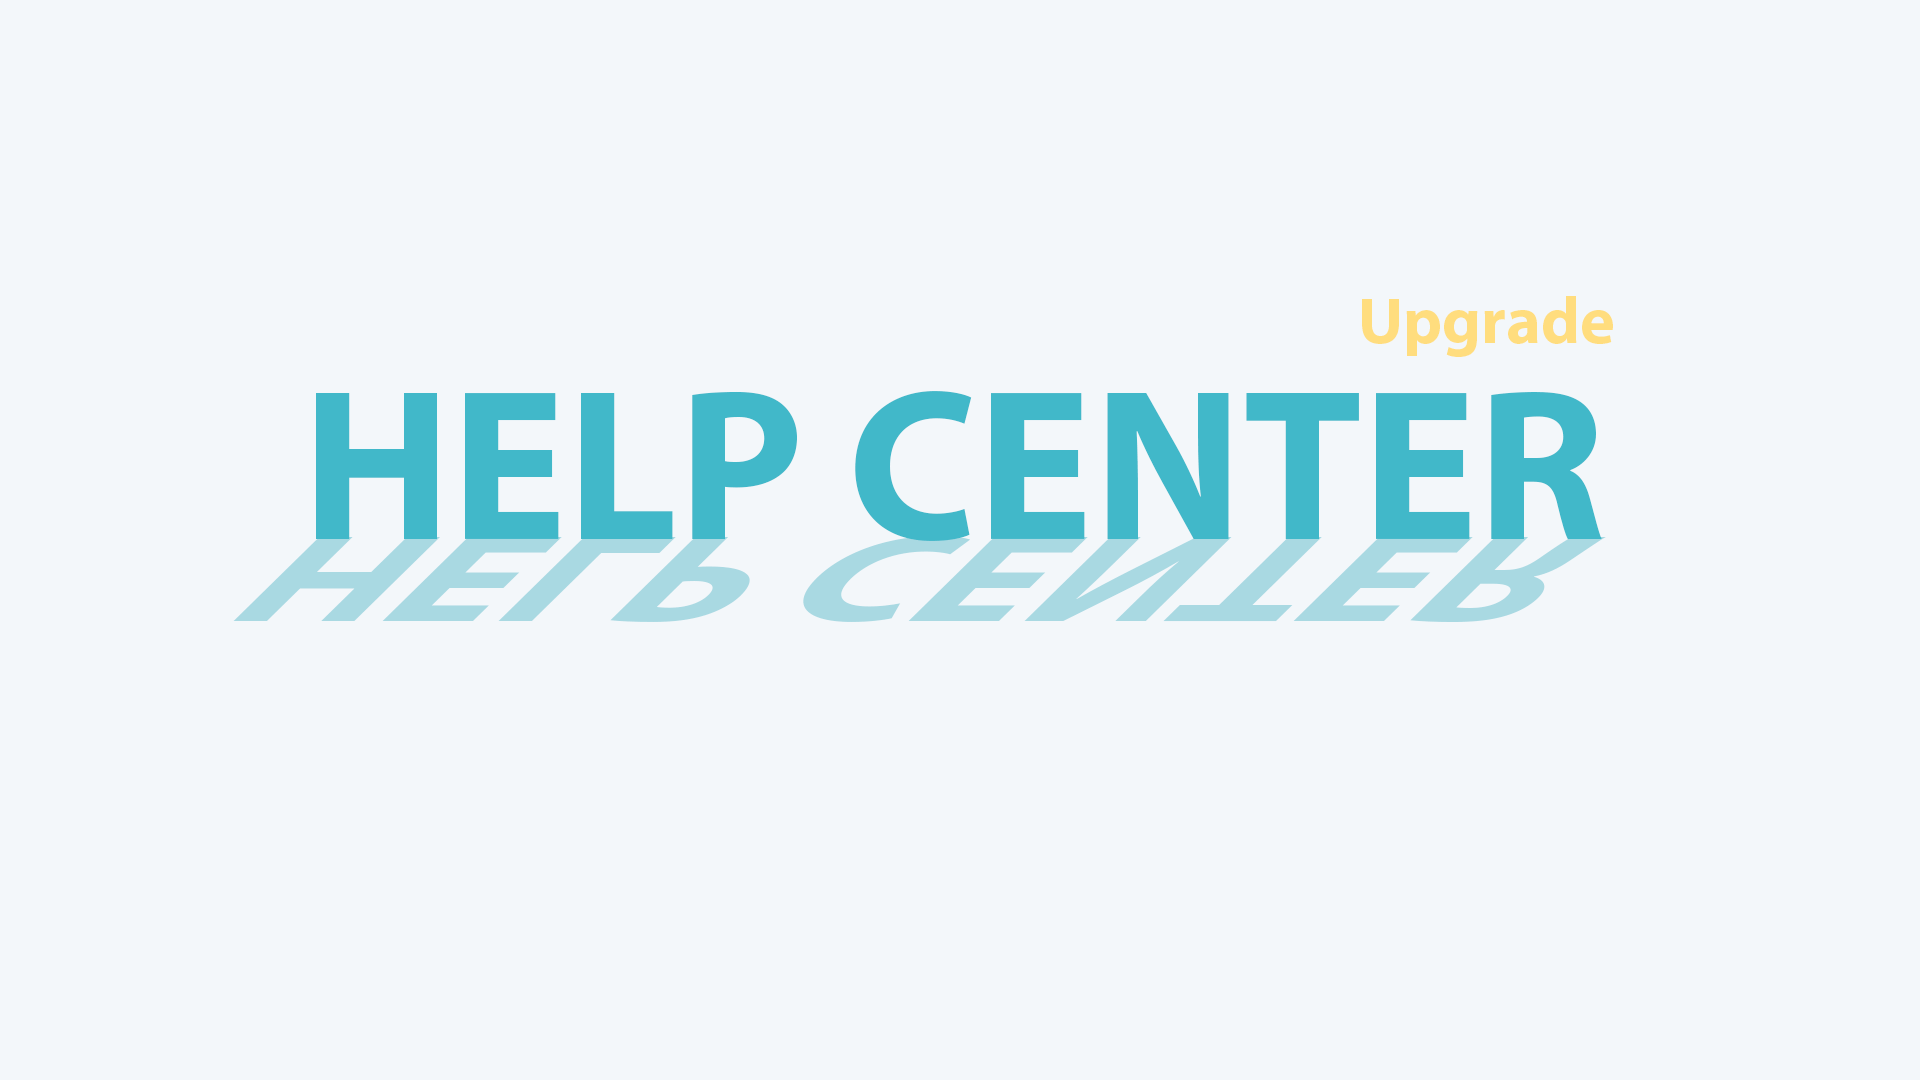 Implementing the latest upgrades to our help center